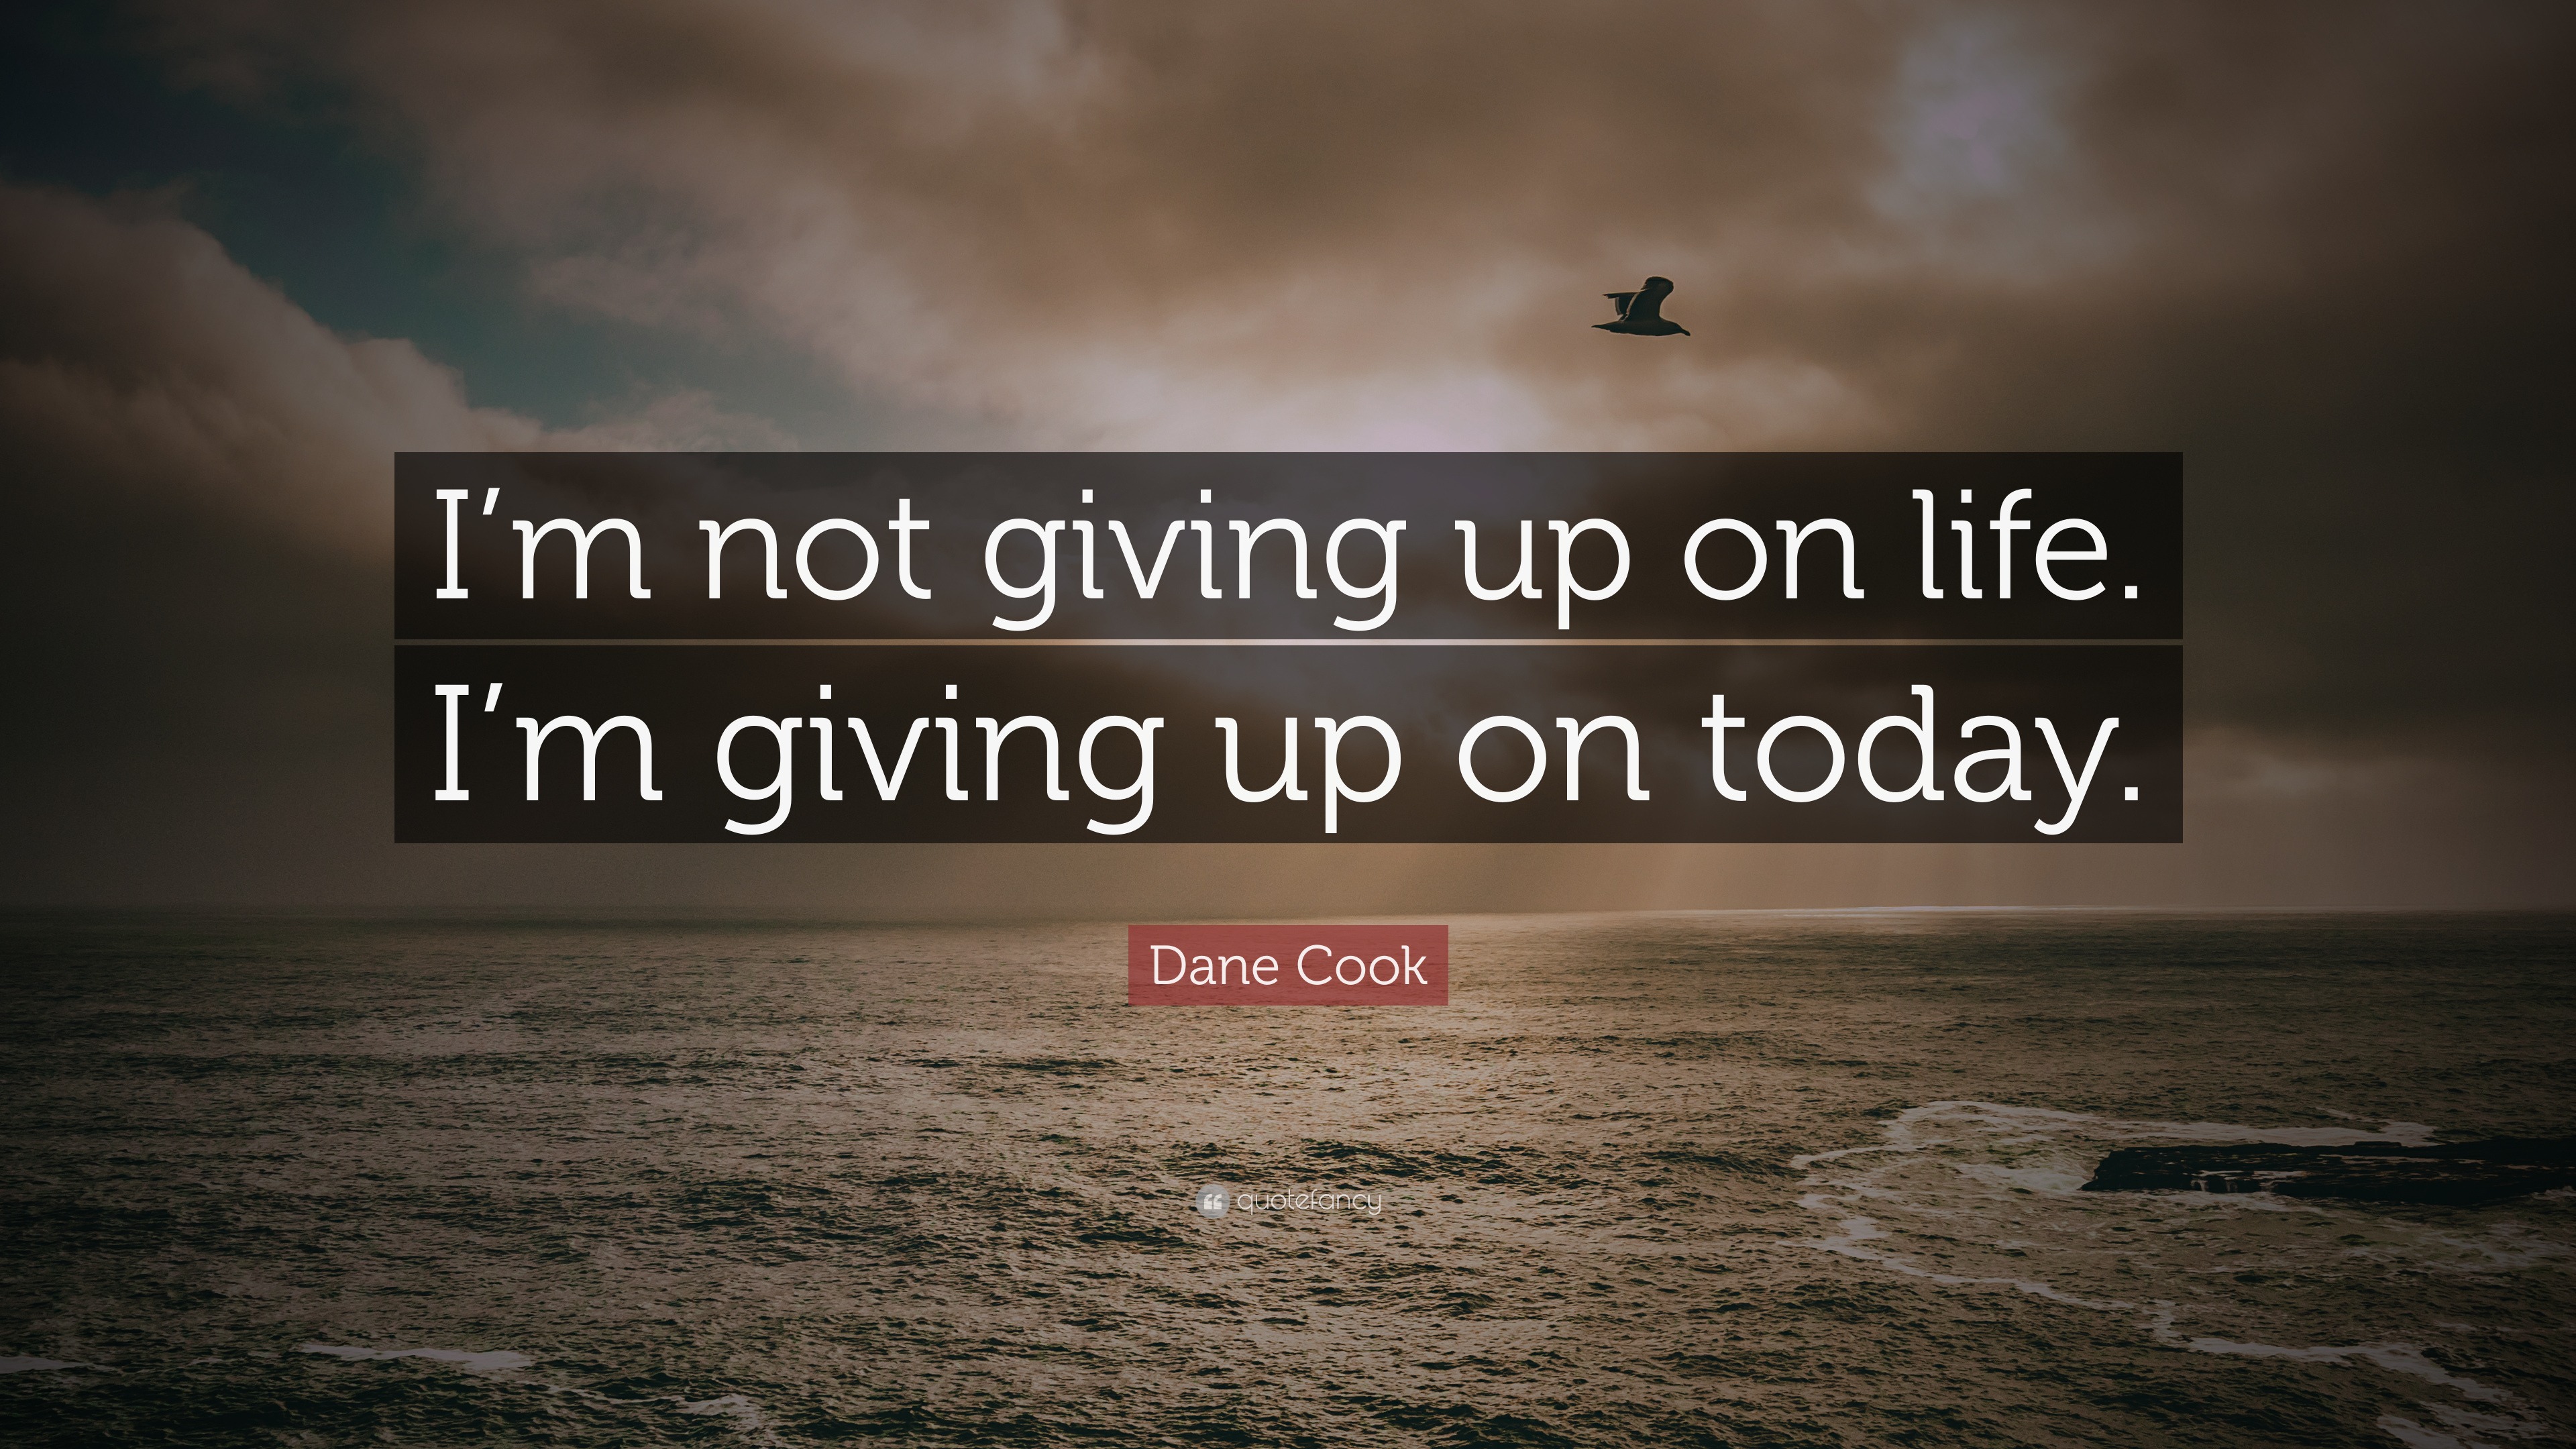 Dane Cook Quote “I’m not giving up on life. I’m giving up